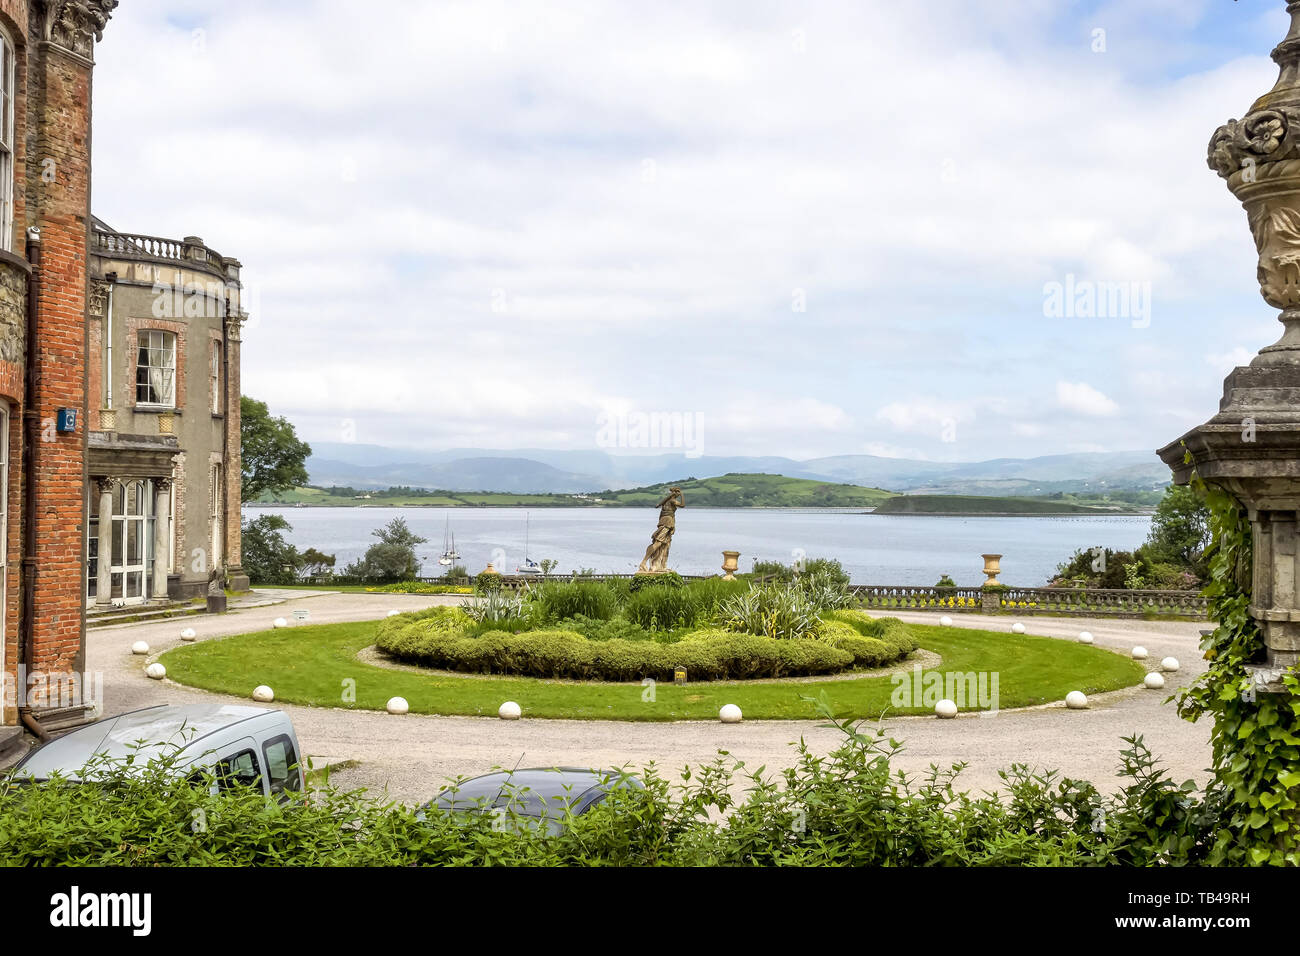 THE 10 BEST Things to Do in Bantry - June 2020 (with Photos 